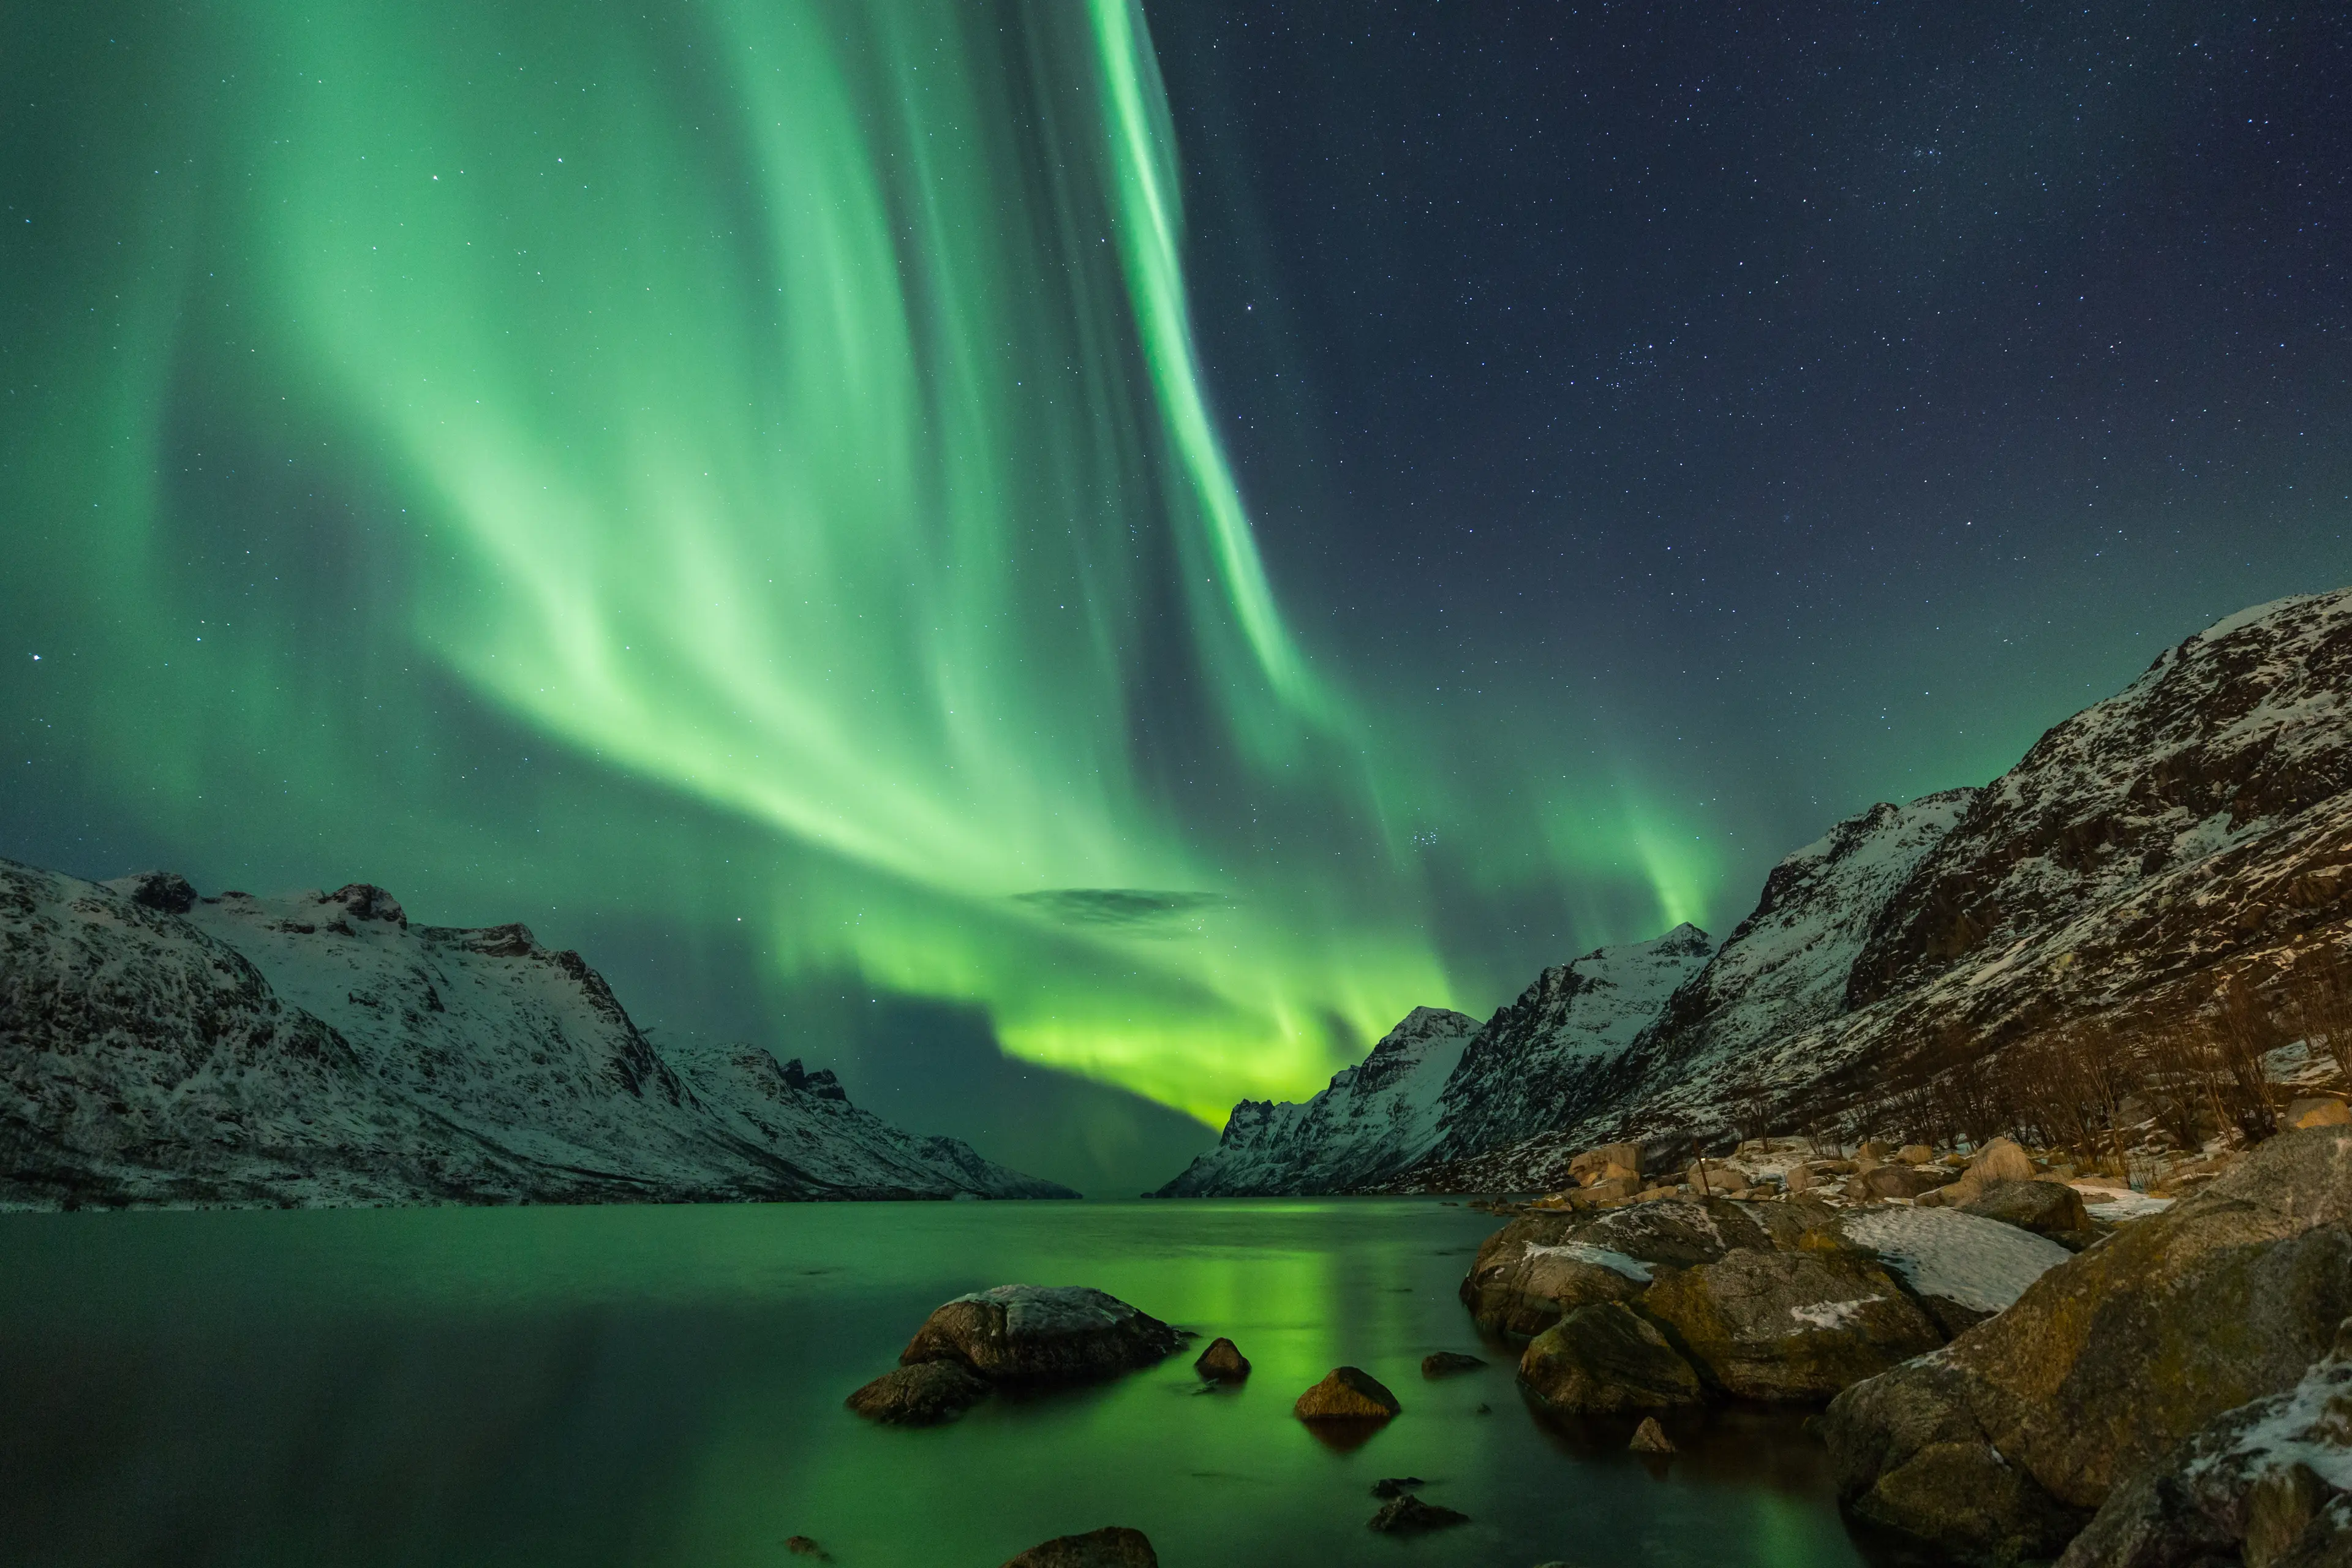 7-Day Norway Adventure and Nightlife Experience with Friends